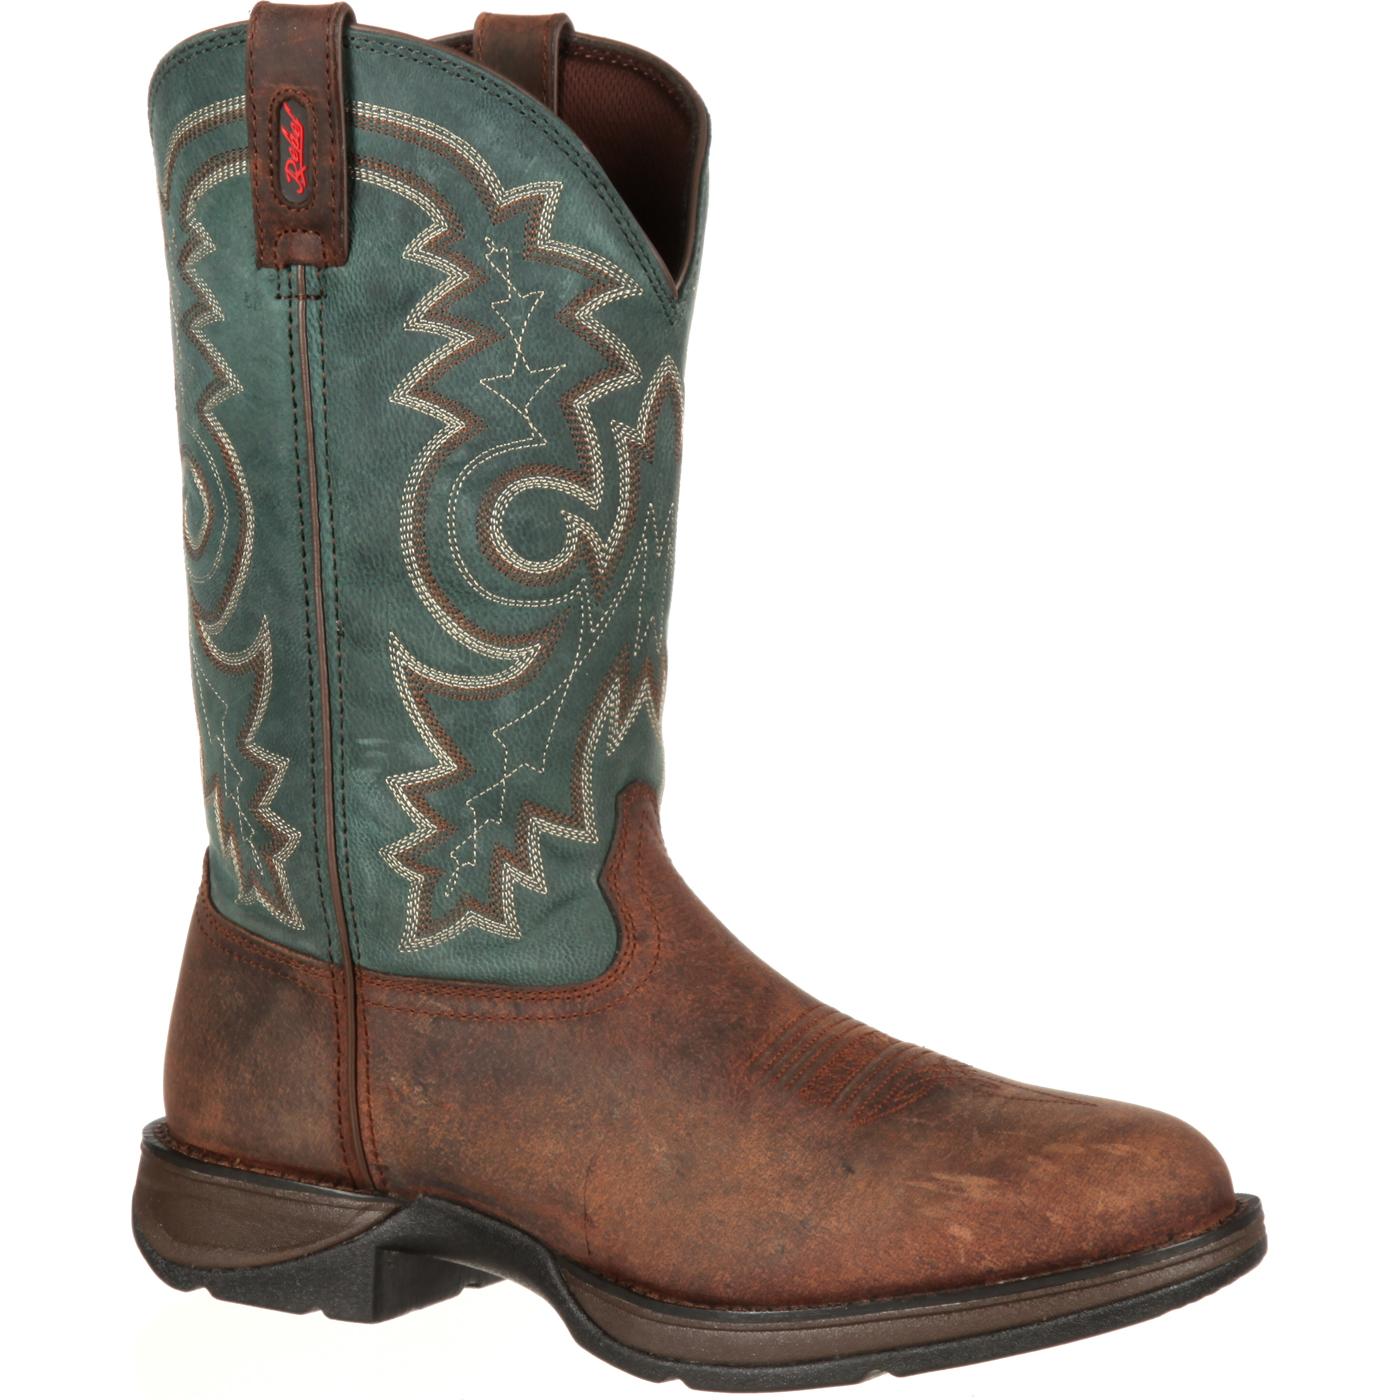 Rebel by Durango #DB017 Men's Pull-On Western Boots